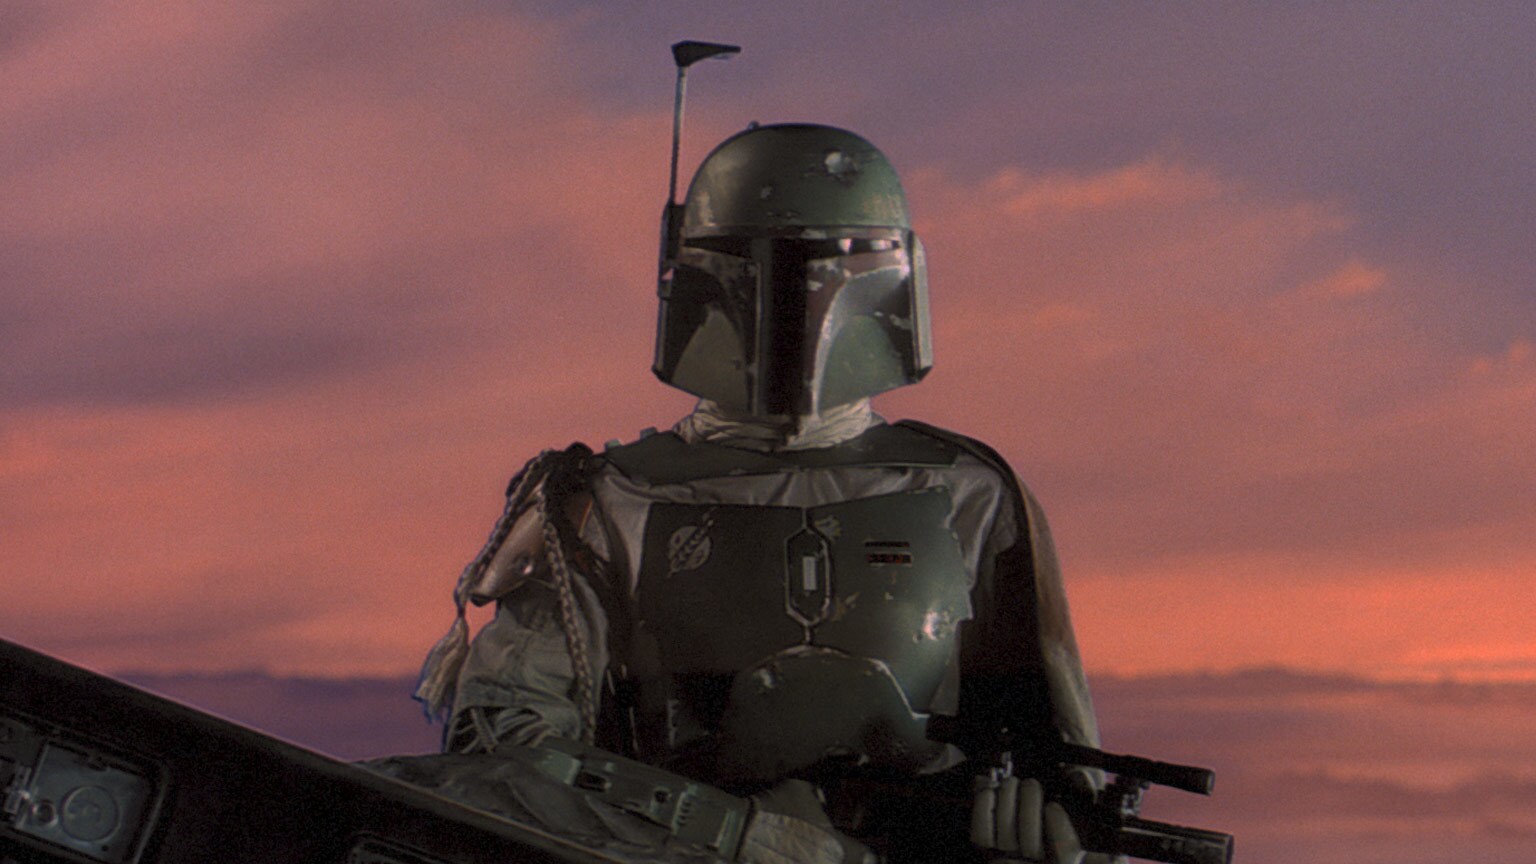 Boba Fett watches as Han is loaded into the Slave I in Star Wars: The Empire Strikes Back.